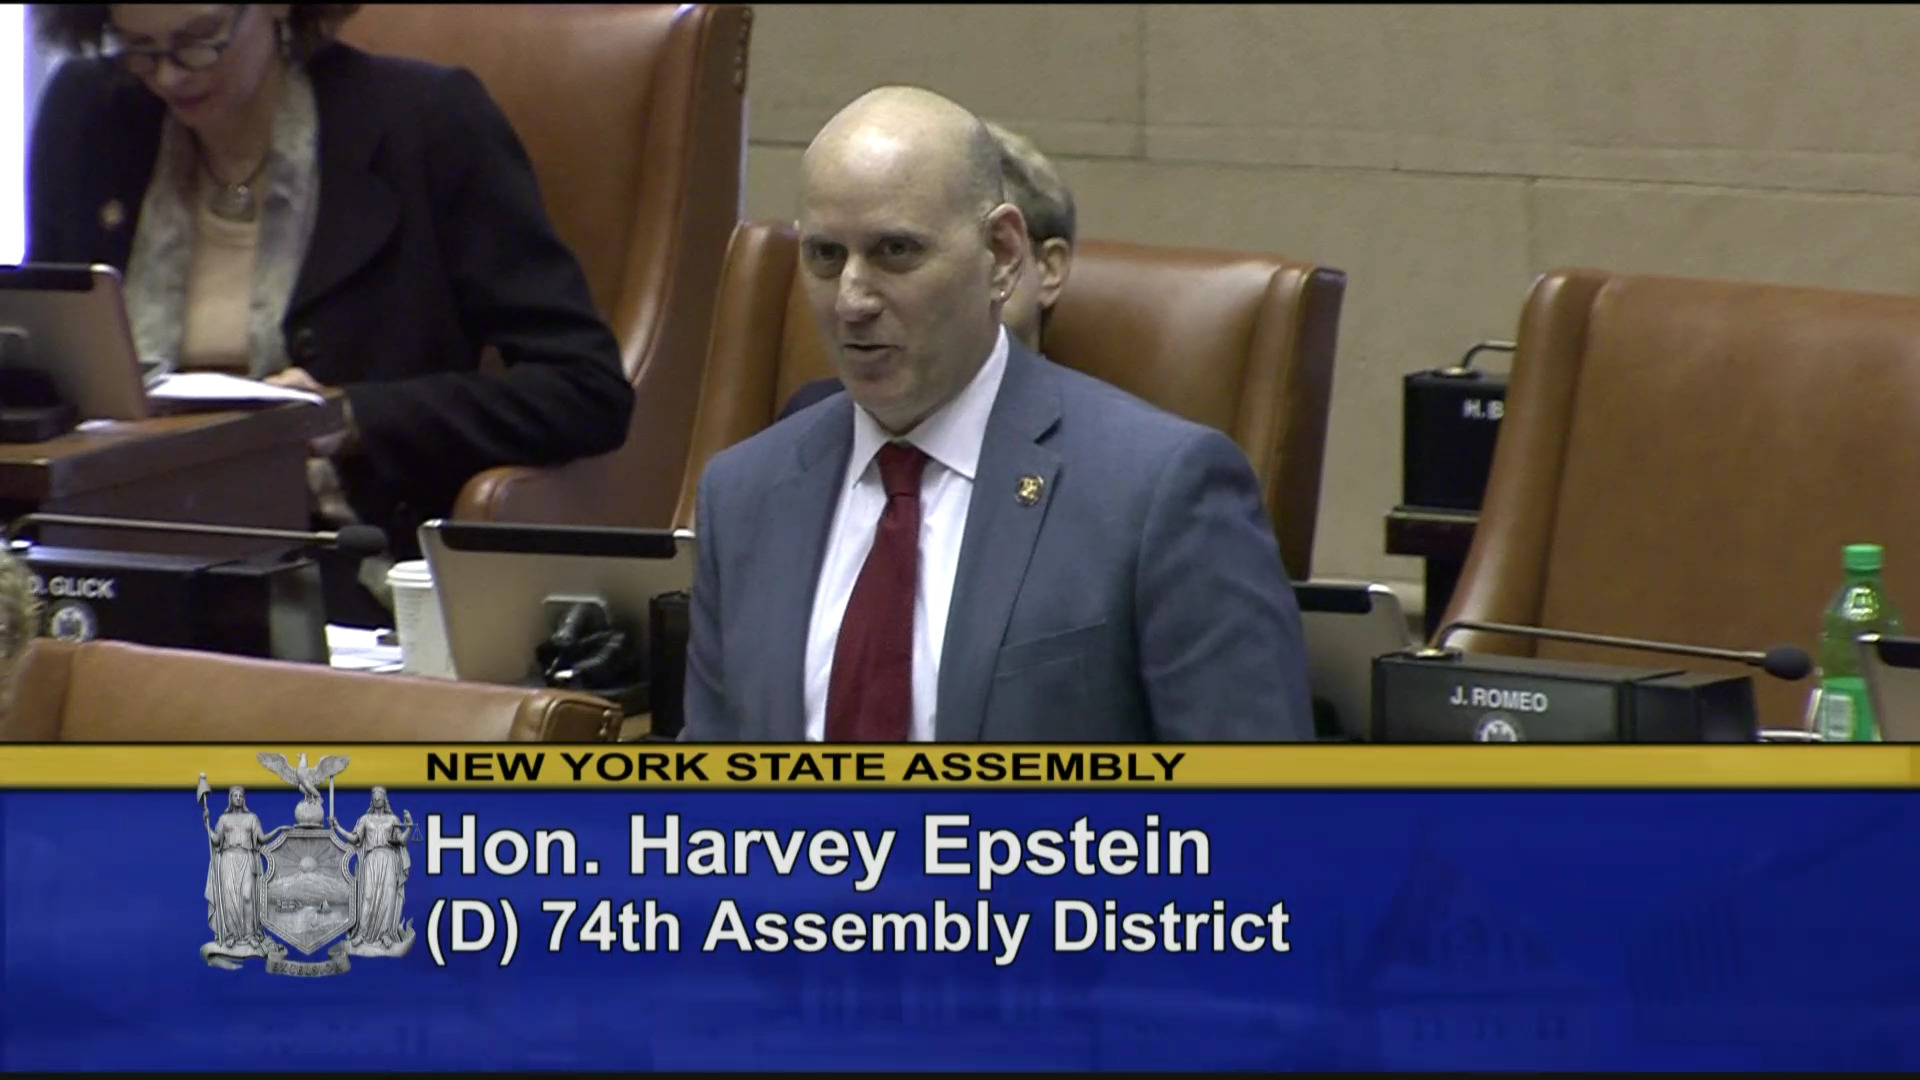 Epstein Introduces West Point Cadet Brian Patterson to Assembly Chamber